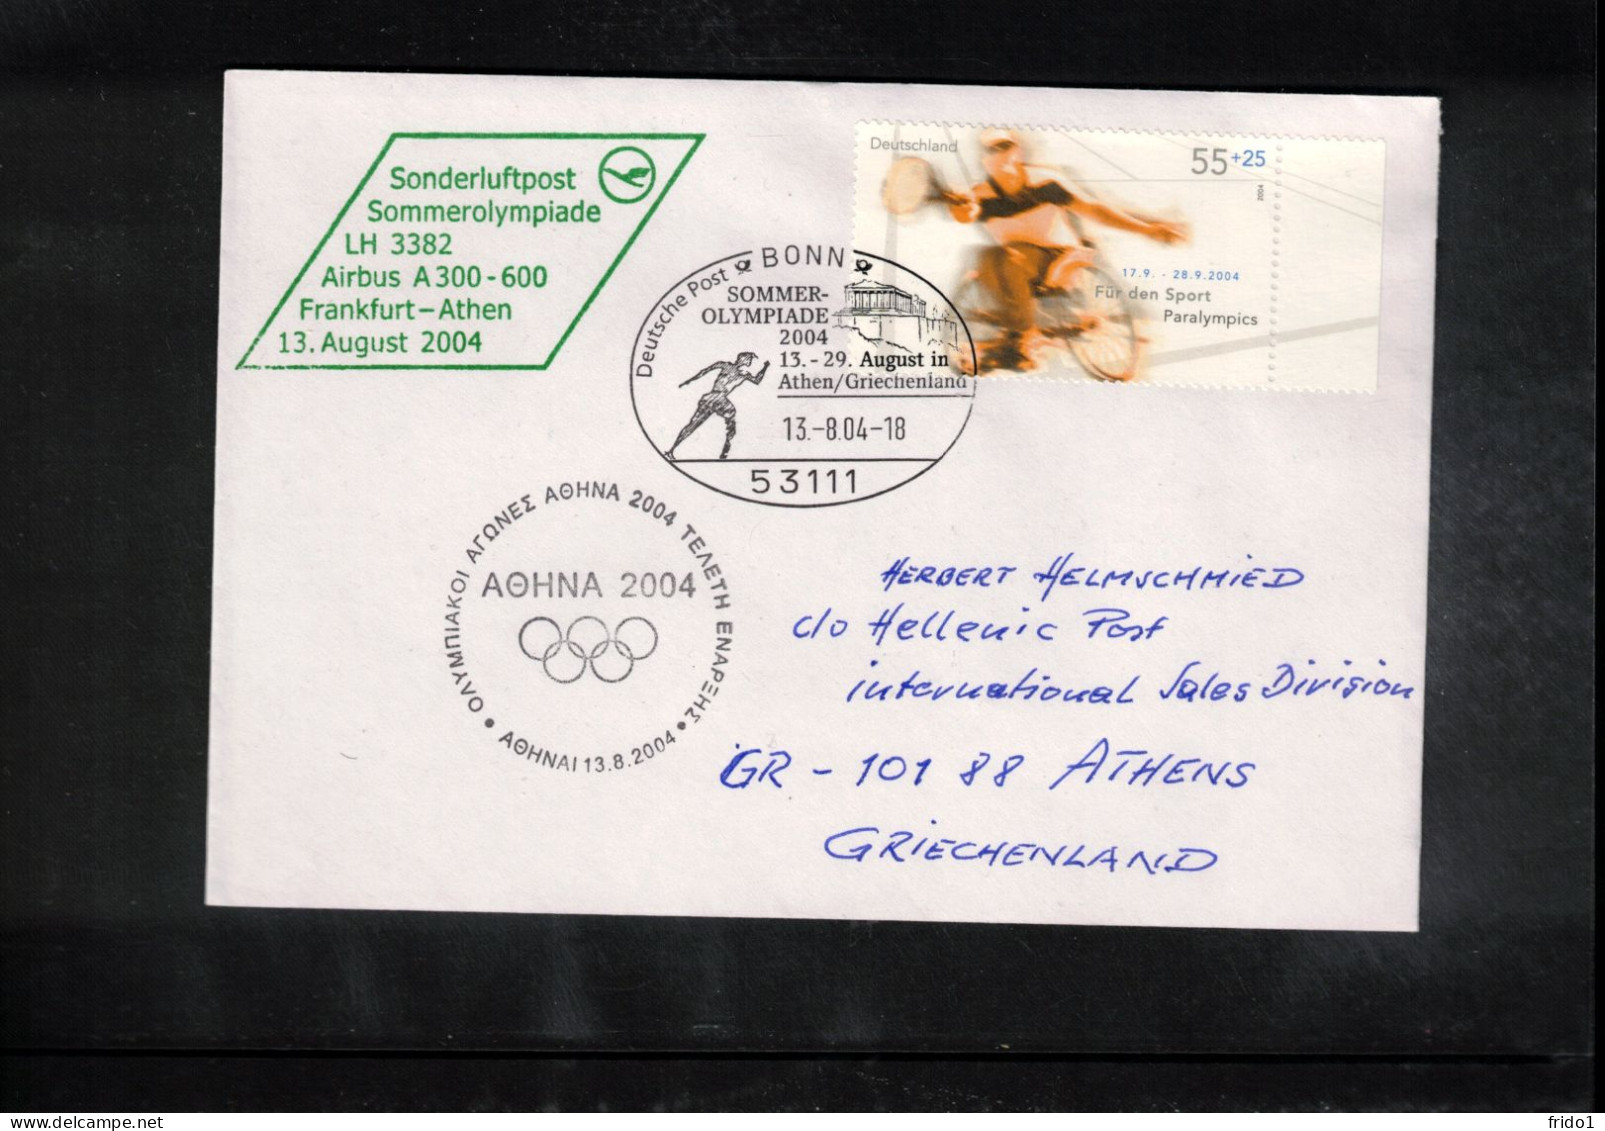 Germany 2004 Olympic Games Athens - Special Lufthansa Flight Frankfurt - Athens Interesting Cover - Summer 2004: Athens